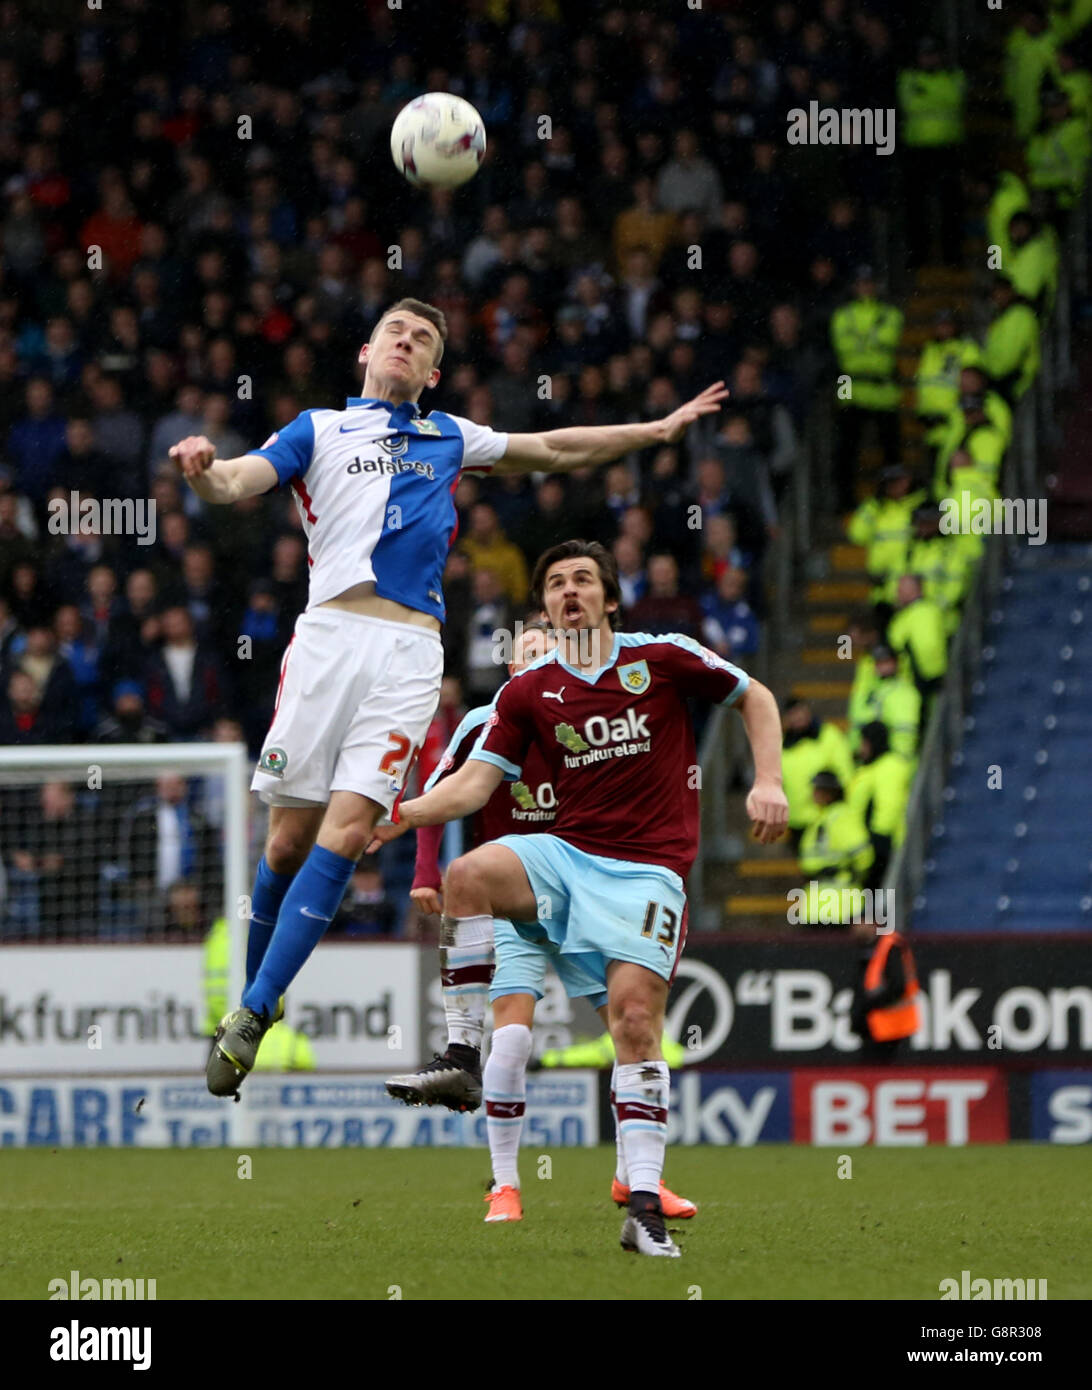 Blackburn Rovers' Darragh Lenihan (left) and Burnley's Joey Barton battle for the ball during the Sky Bet Championship match at Turf Moor, Burnley. Stock Photo